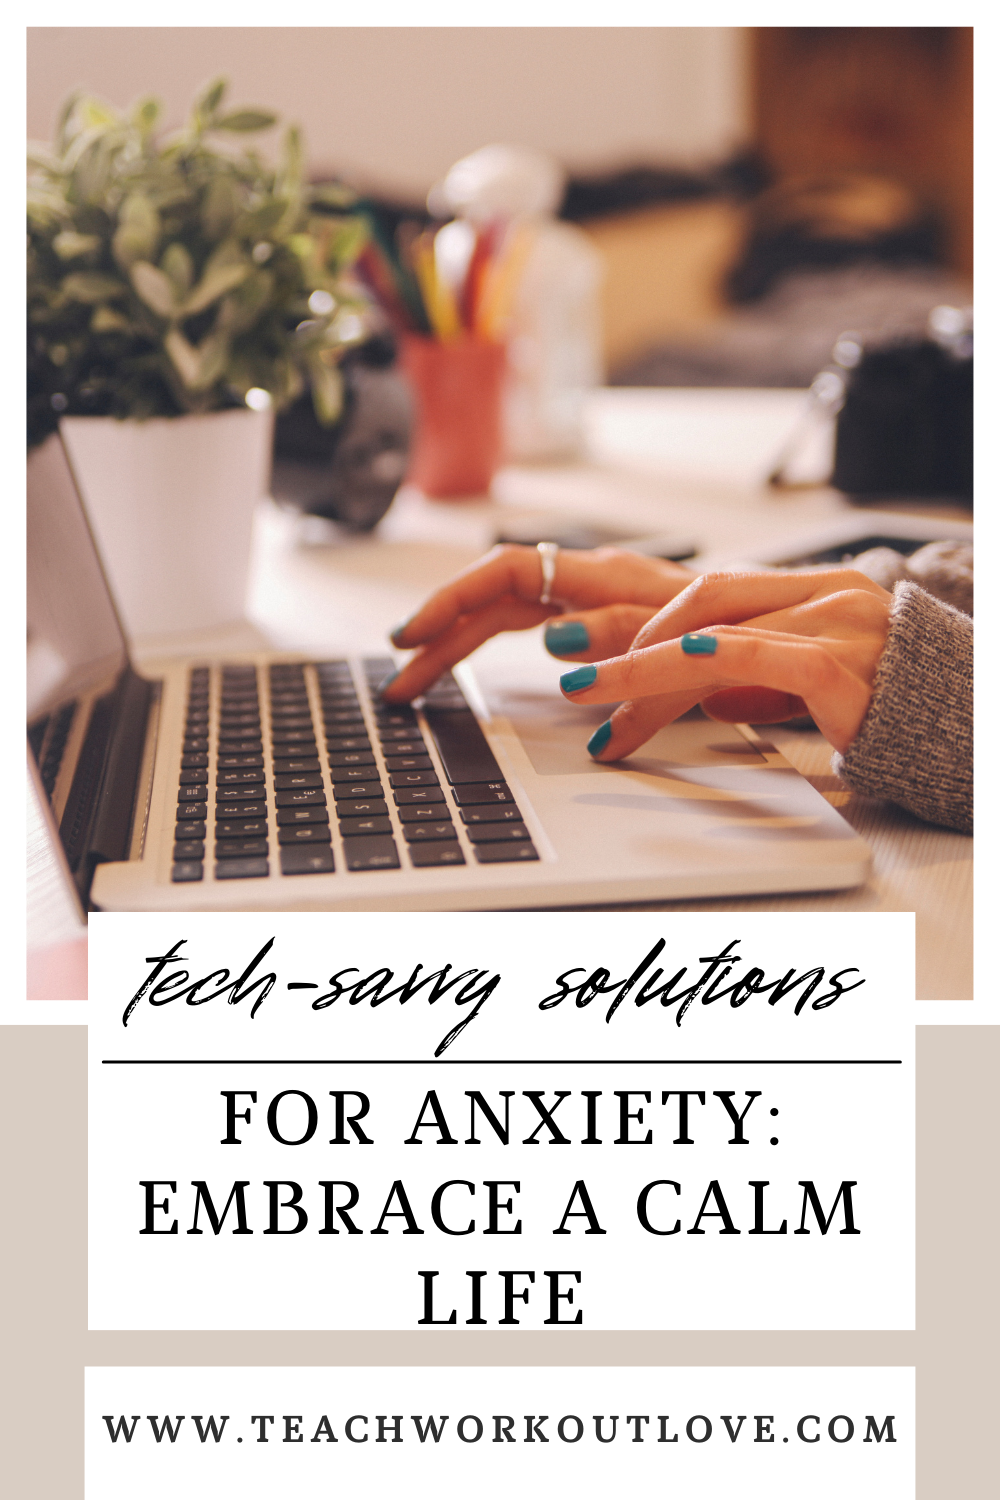 According to recent studies, stress affects 8 out of 10 people, making it crucial to address this issue. So, there's good news! Certain tech-savvy solutions can help you embrace a calmer lifestyle and manage anxiety better. And this post explores those options. Let's read to find a balance between technology and tranquility for a happier life.